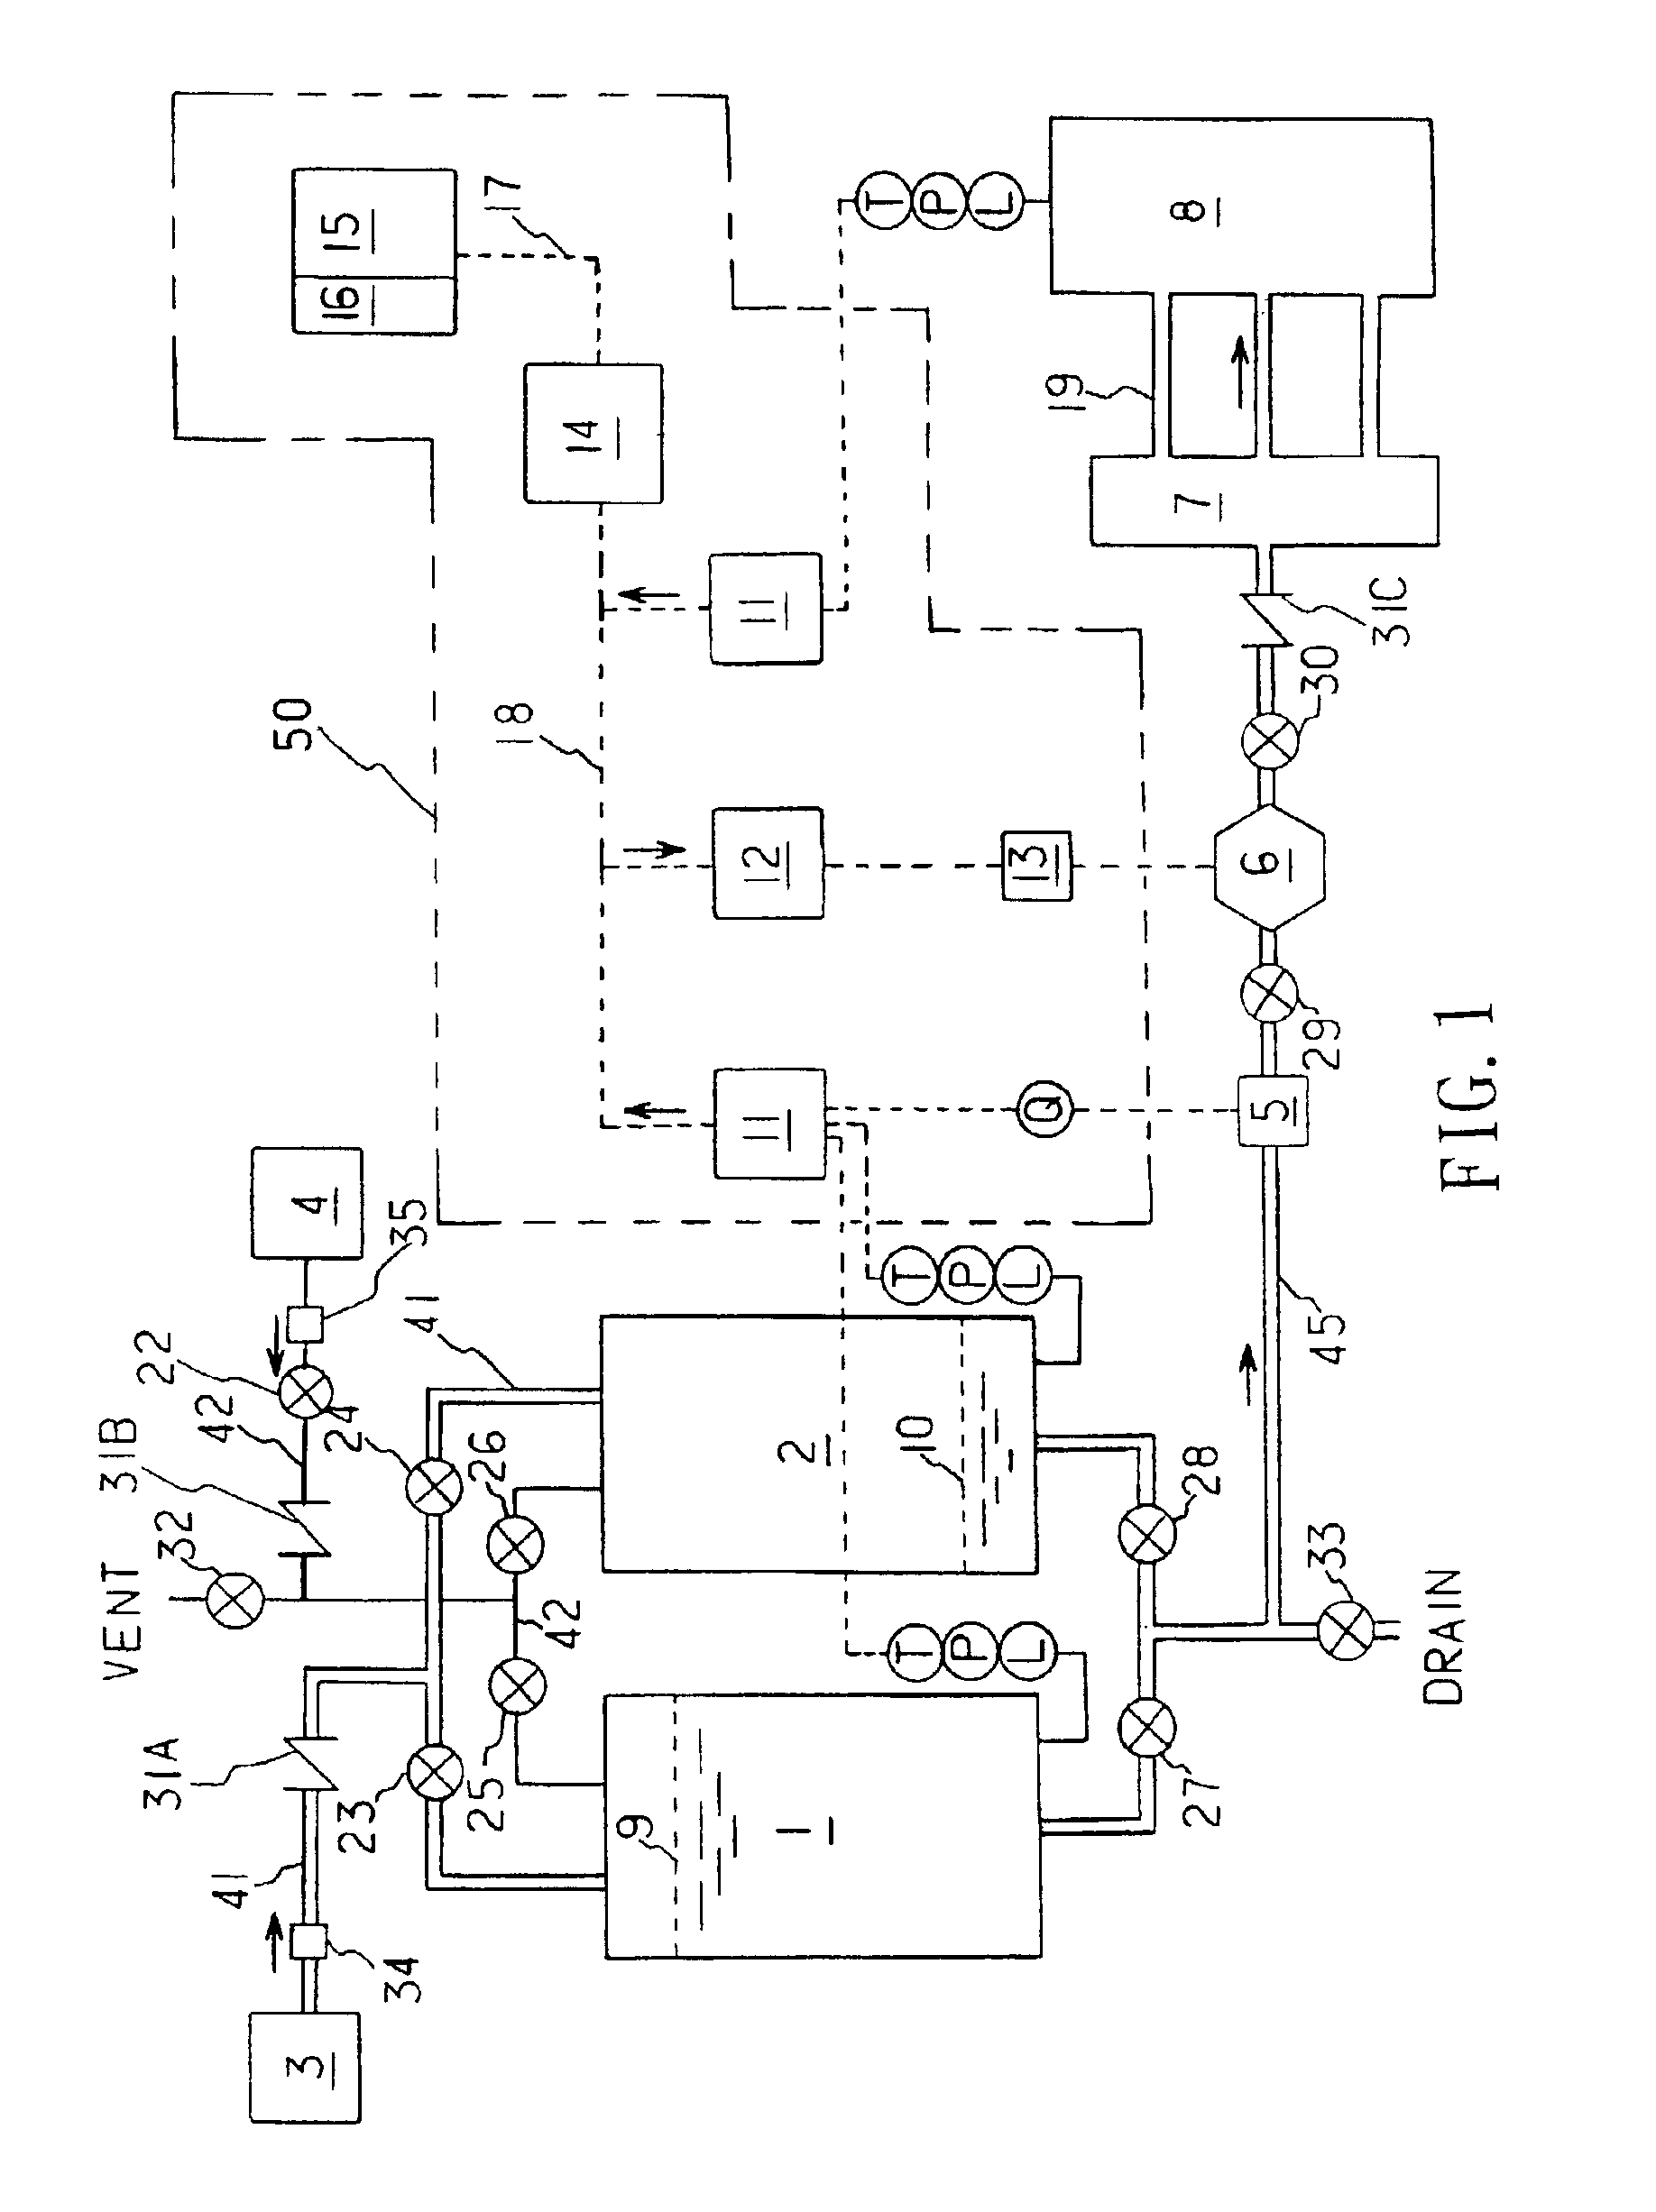 Multifunction passive and continuous fluid feeding system